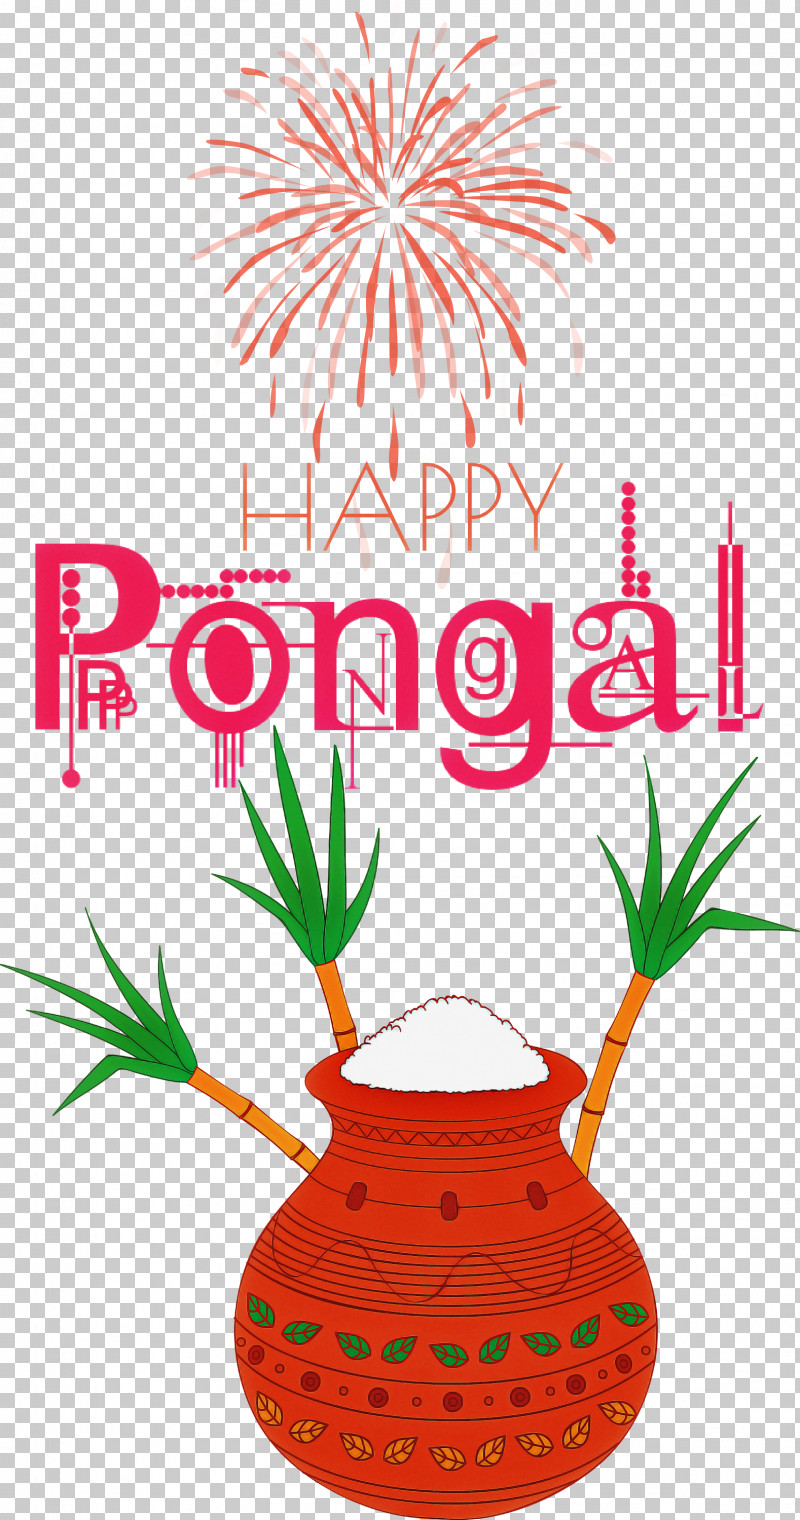 Pongal Happy Pongal PNG, Clipart, Arts, Bahrain Riders Club, Festival, Floral Design, Flower Free PNG Download